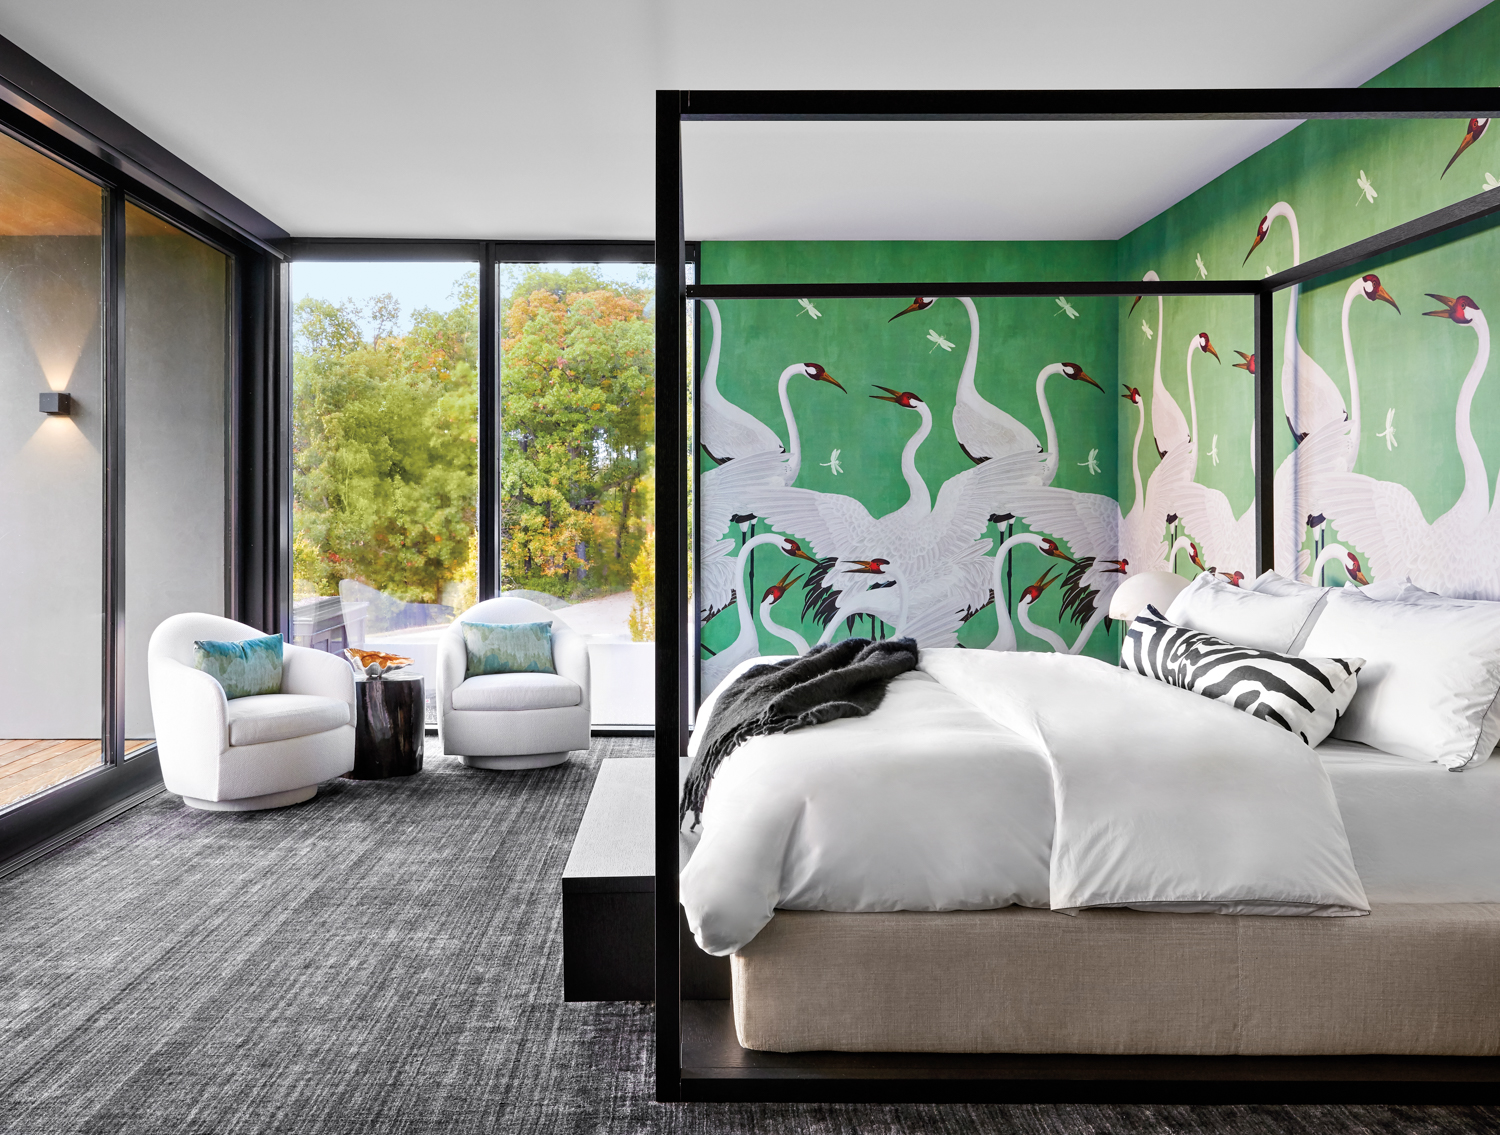 A bedroom with a dramatic green wallcovering with white herons. There is a black four-poster bed and two white swivel chairs.